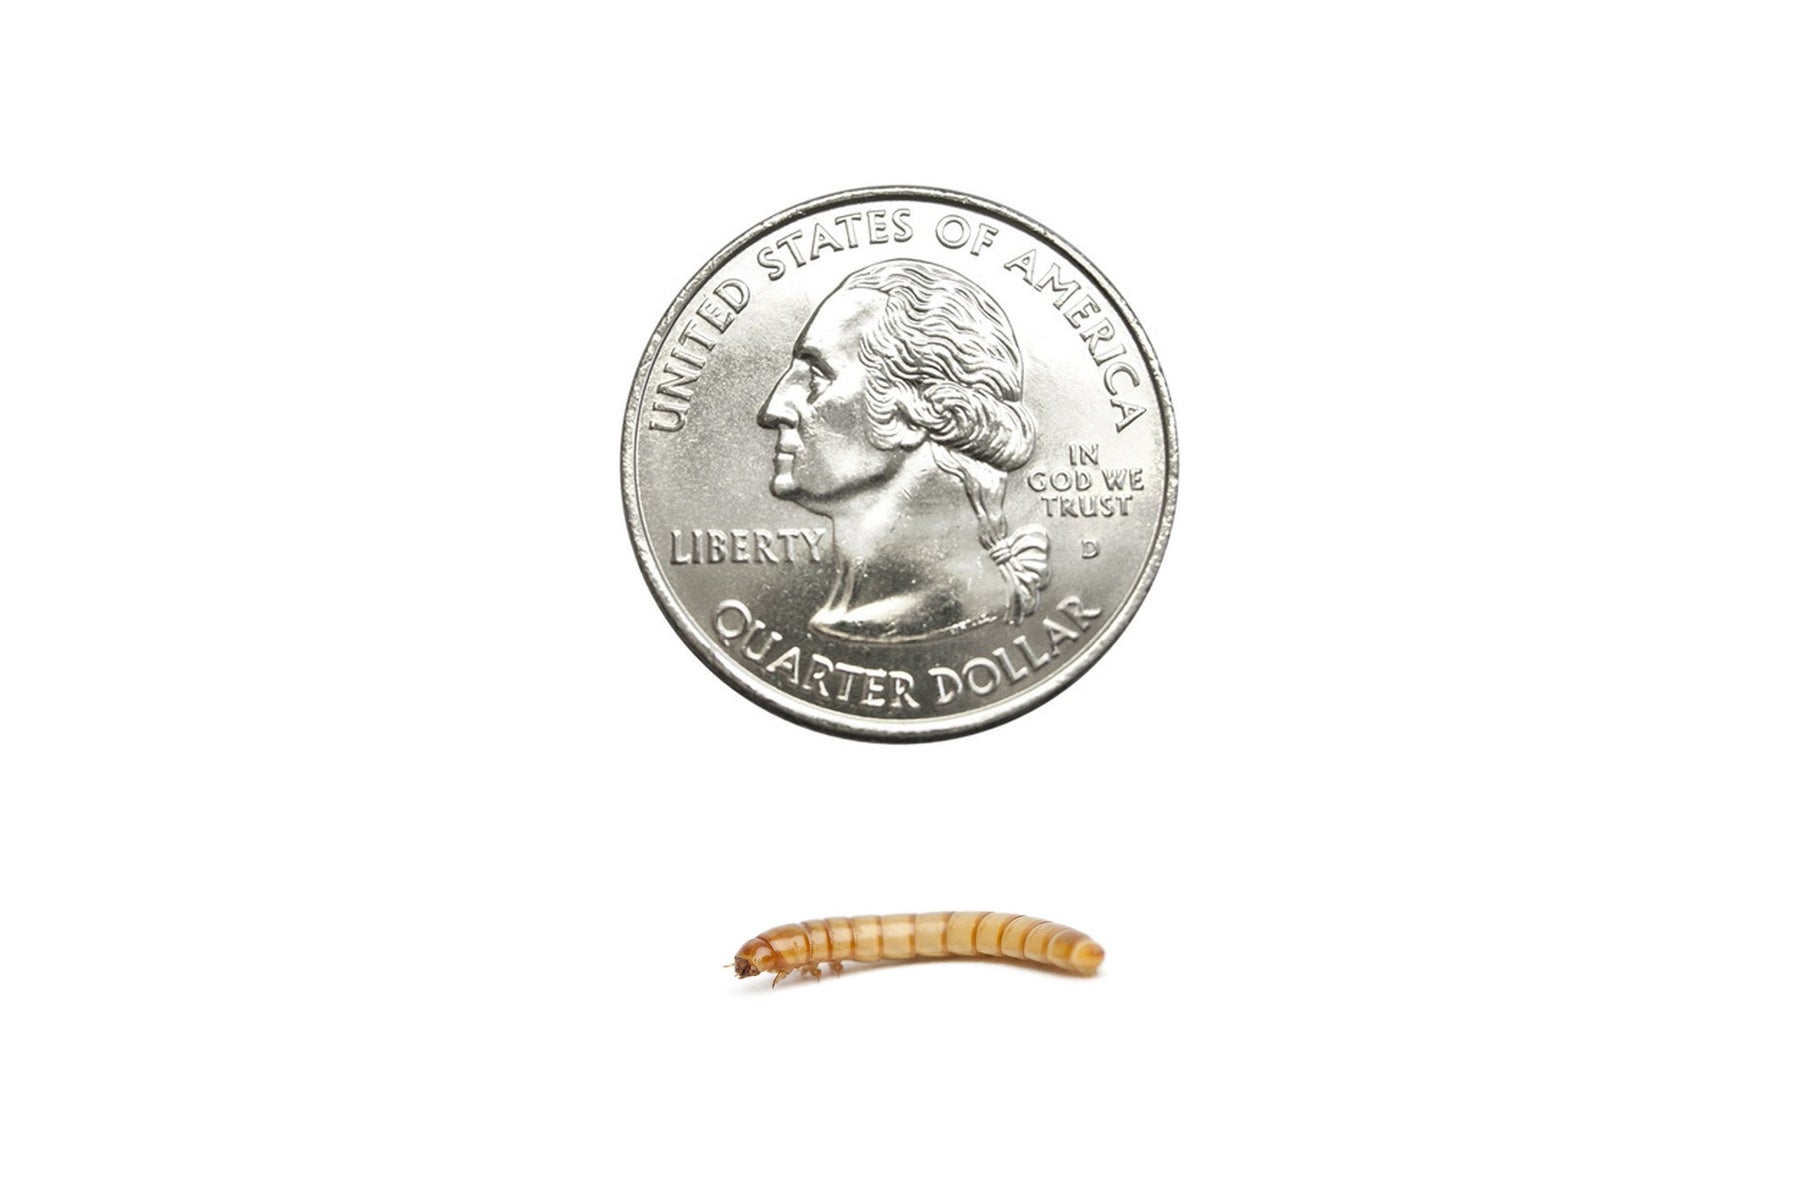 Medium Mealworms (Cupped) - DubiaRoaches.com